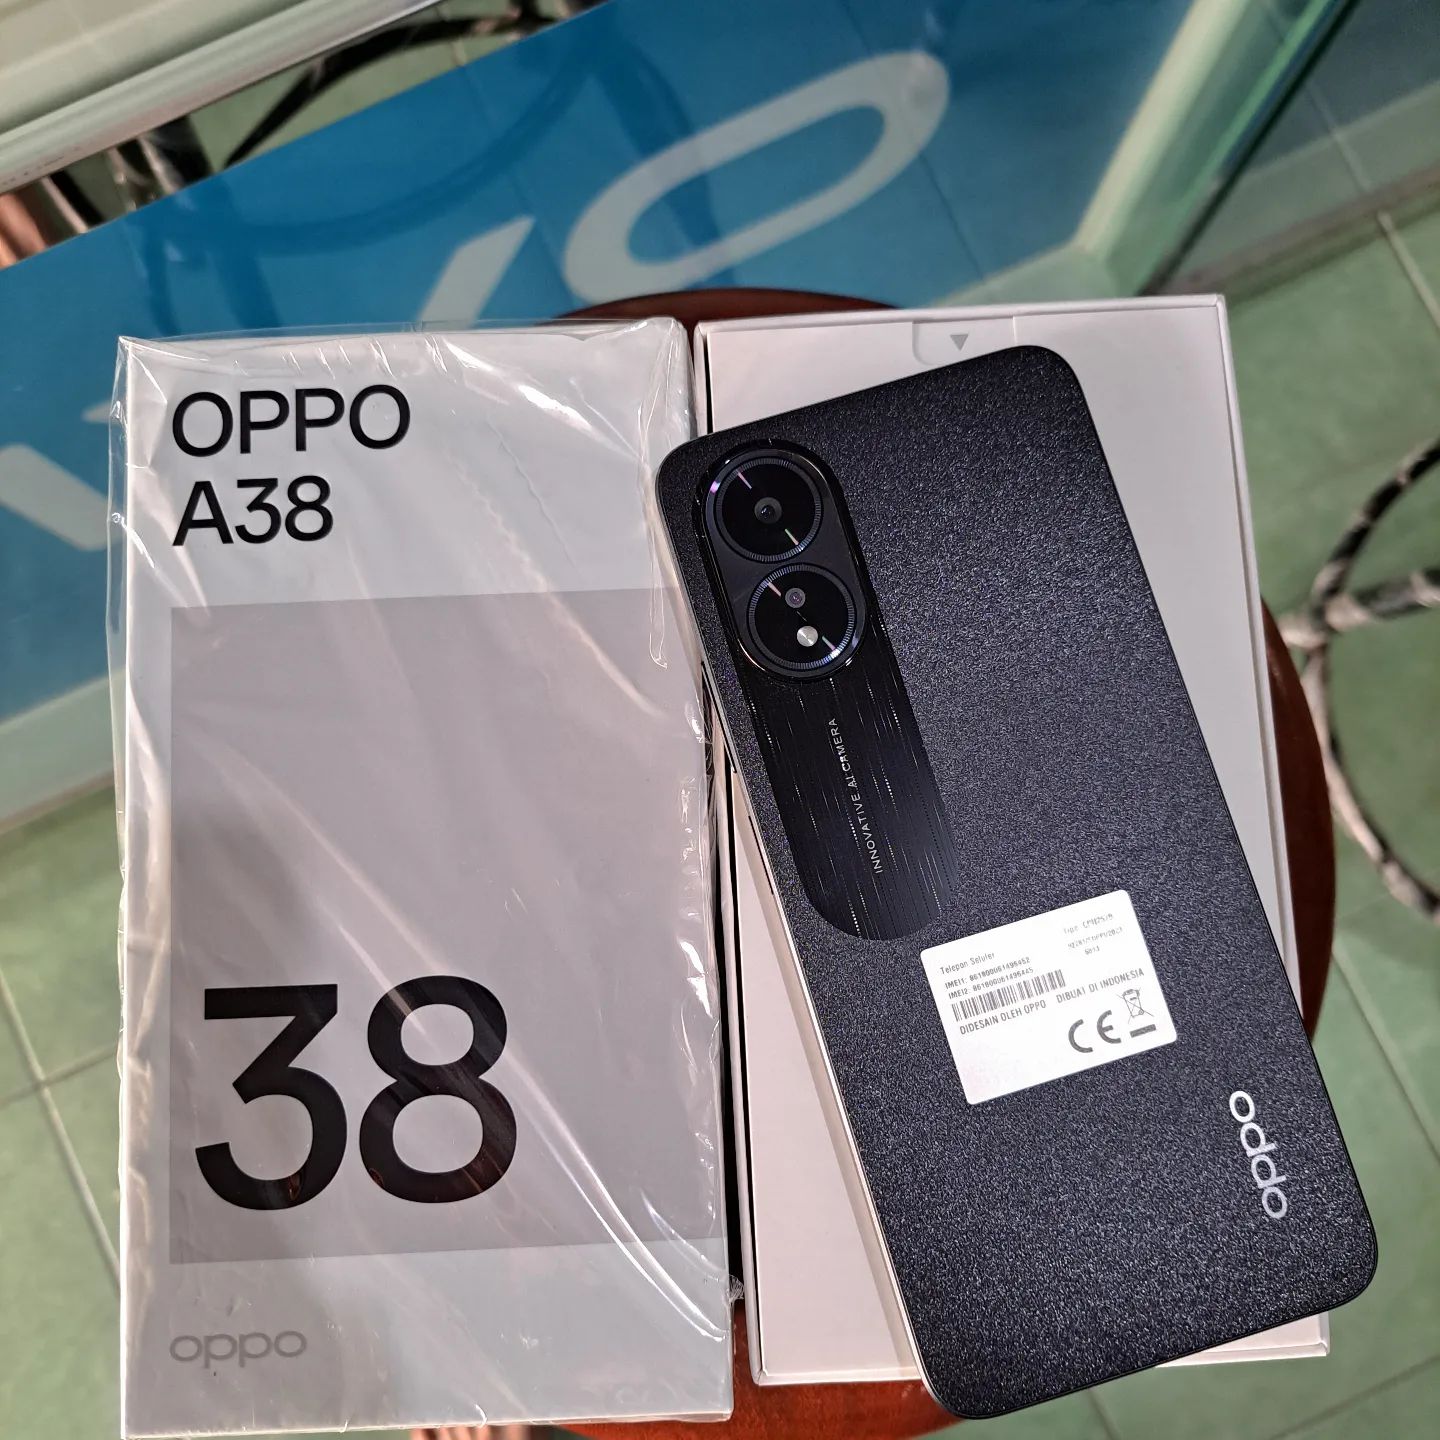 The OPPO A38 Strikes a Great Balance of Affordability, Performance